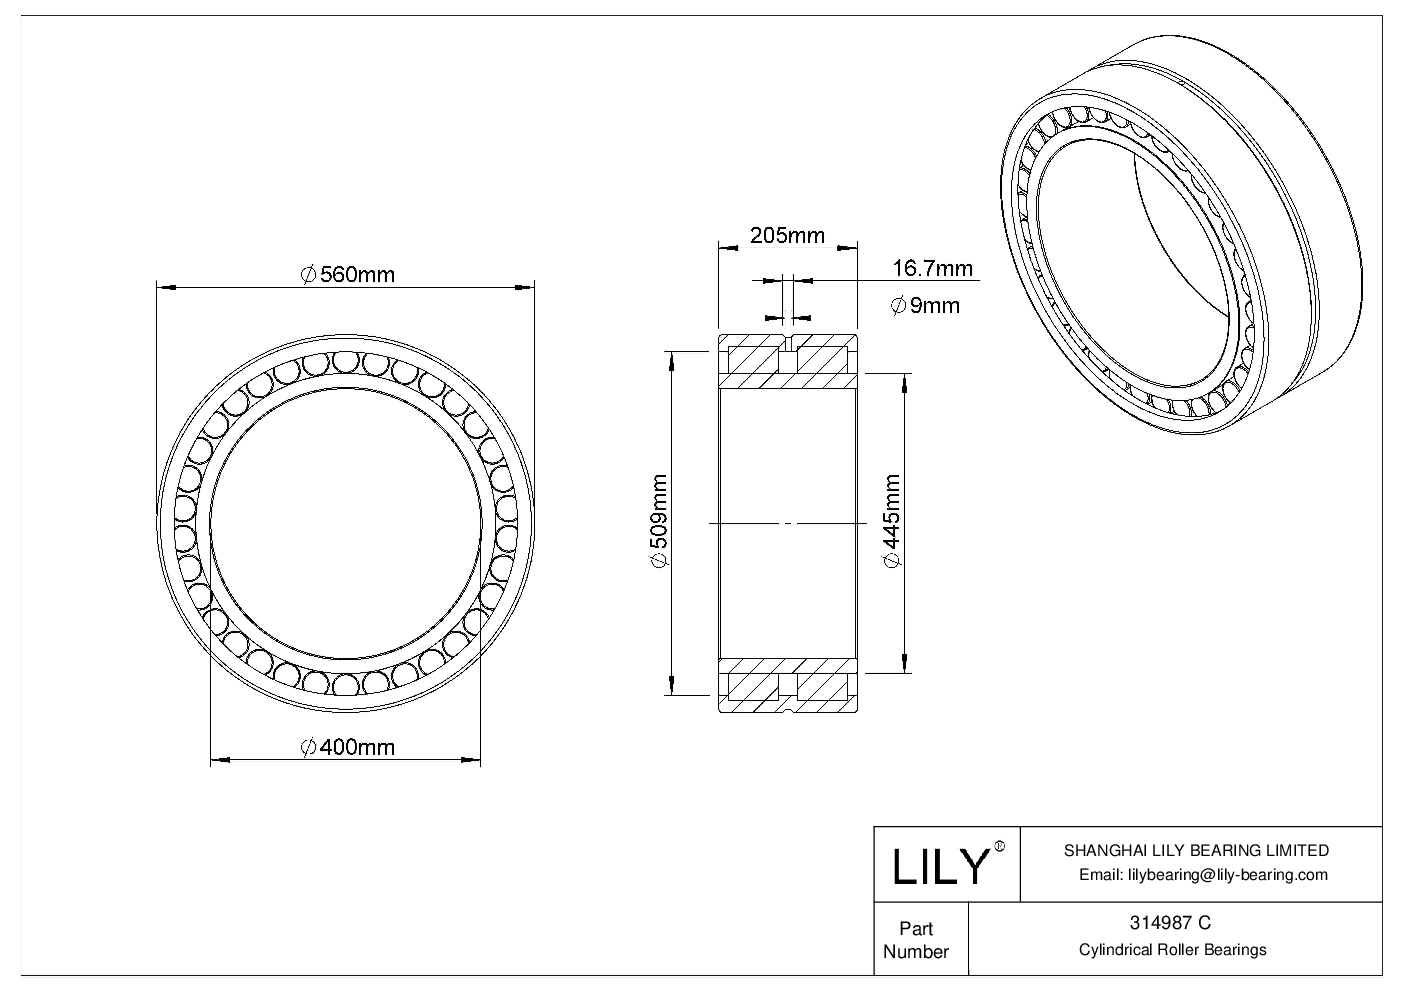 314987 C Double Row Cylindrical Roller Bearings cad drawing